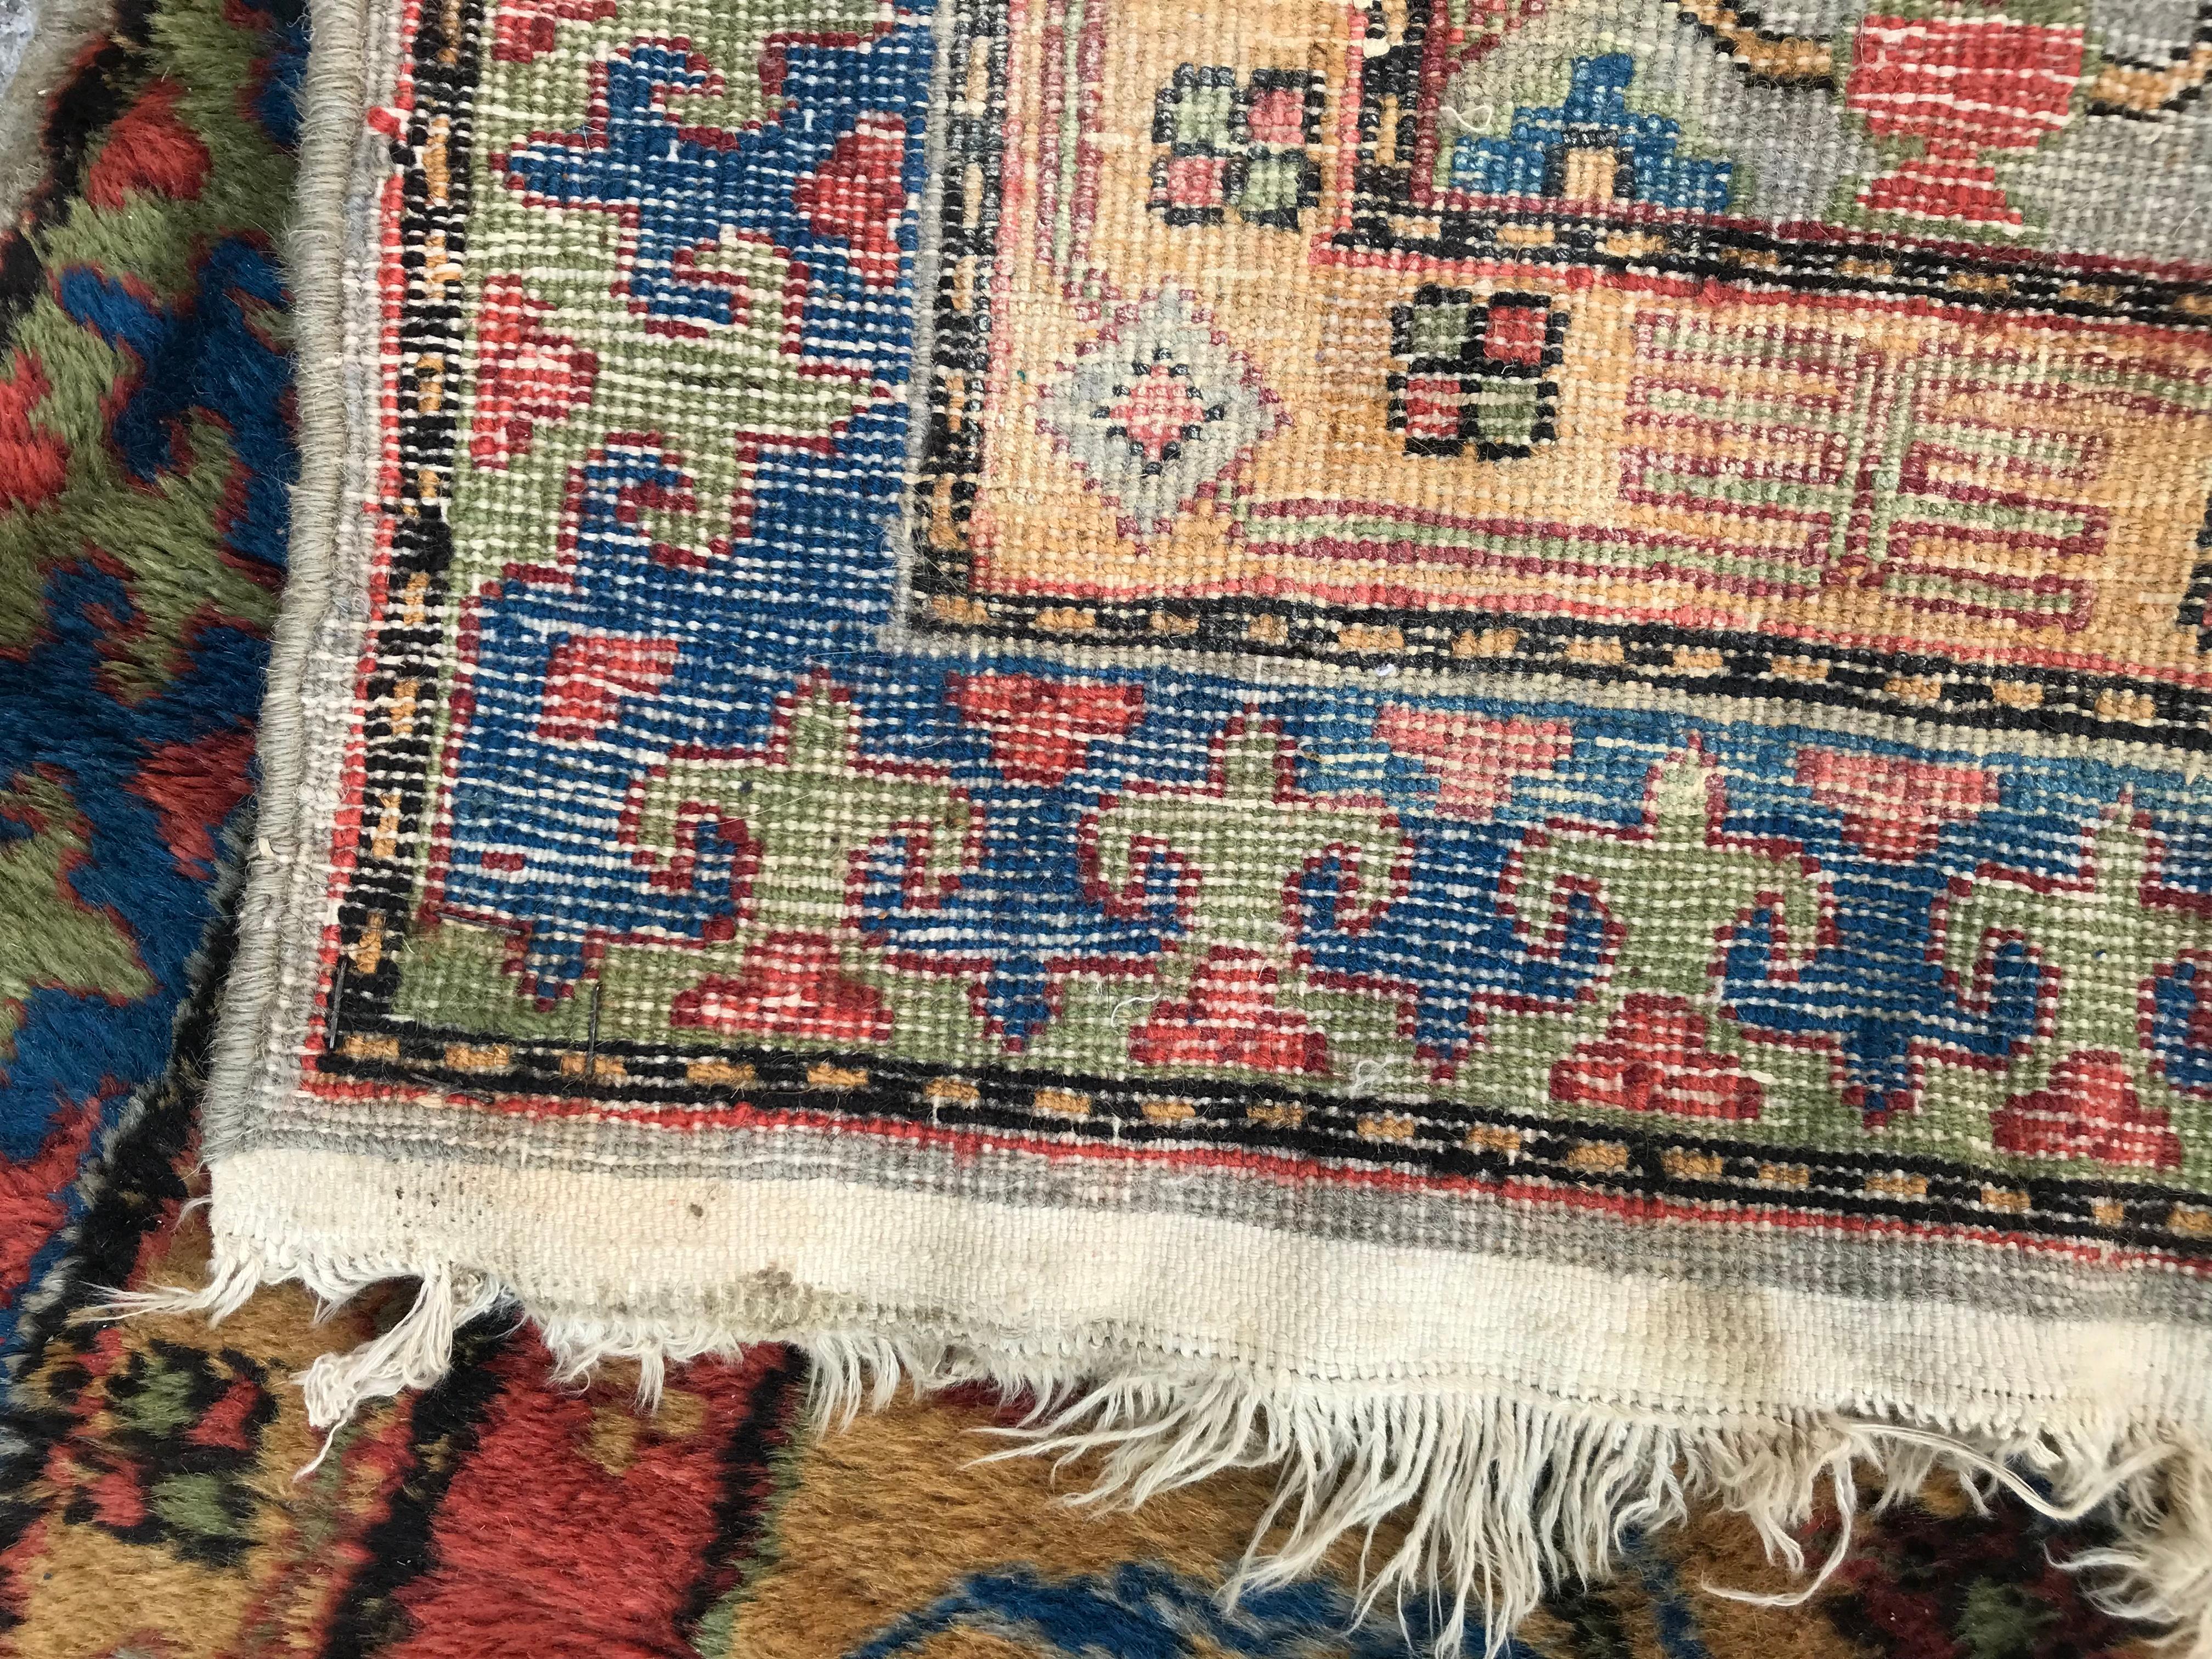 Little Vintage Sinkiang Rug, Antique Persian Style Rugs, 20th Century Carpets 3